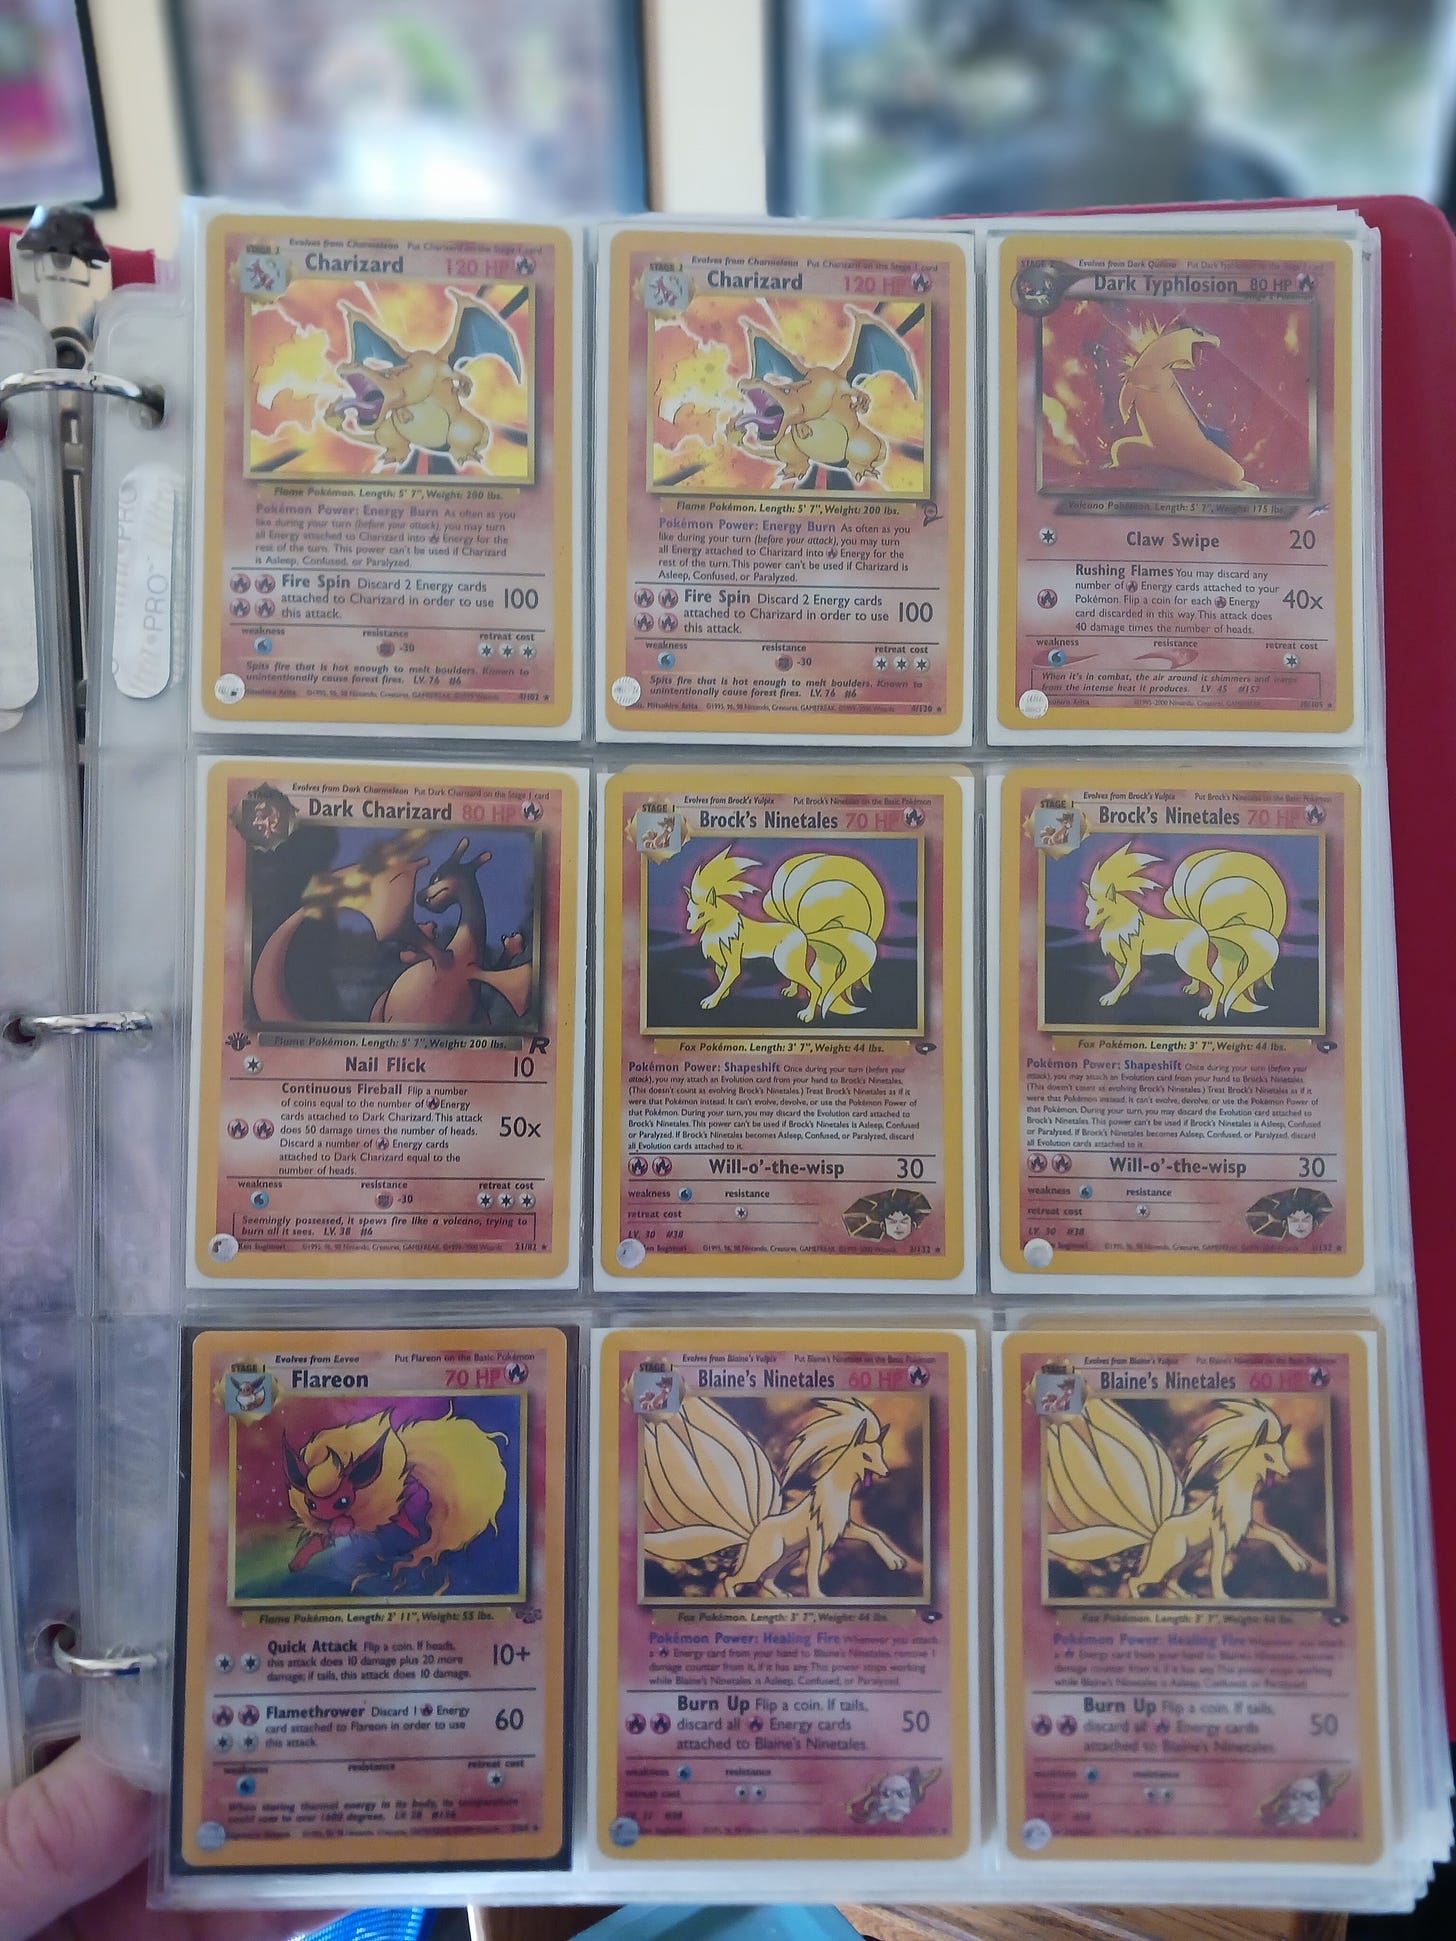 A page of Ryan’s binder of Pokémon cards, featuring powerful fire type Pokémon from the Jungle, Team Rocket, Gym Heroes, Gym Challenge, and Neo Genesis TCG sets.